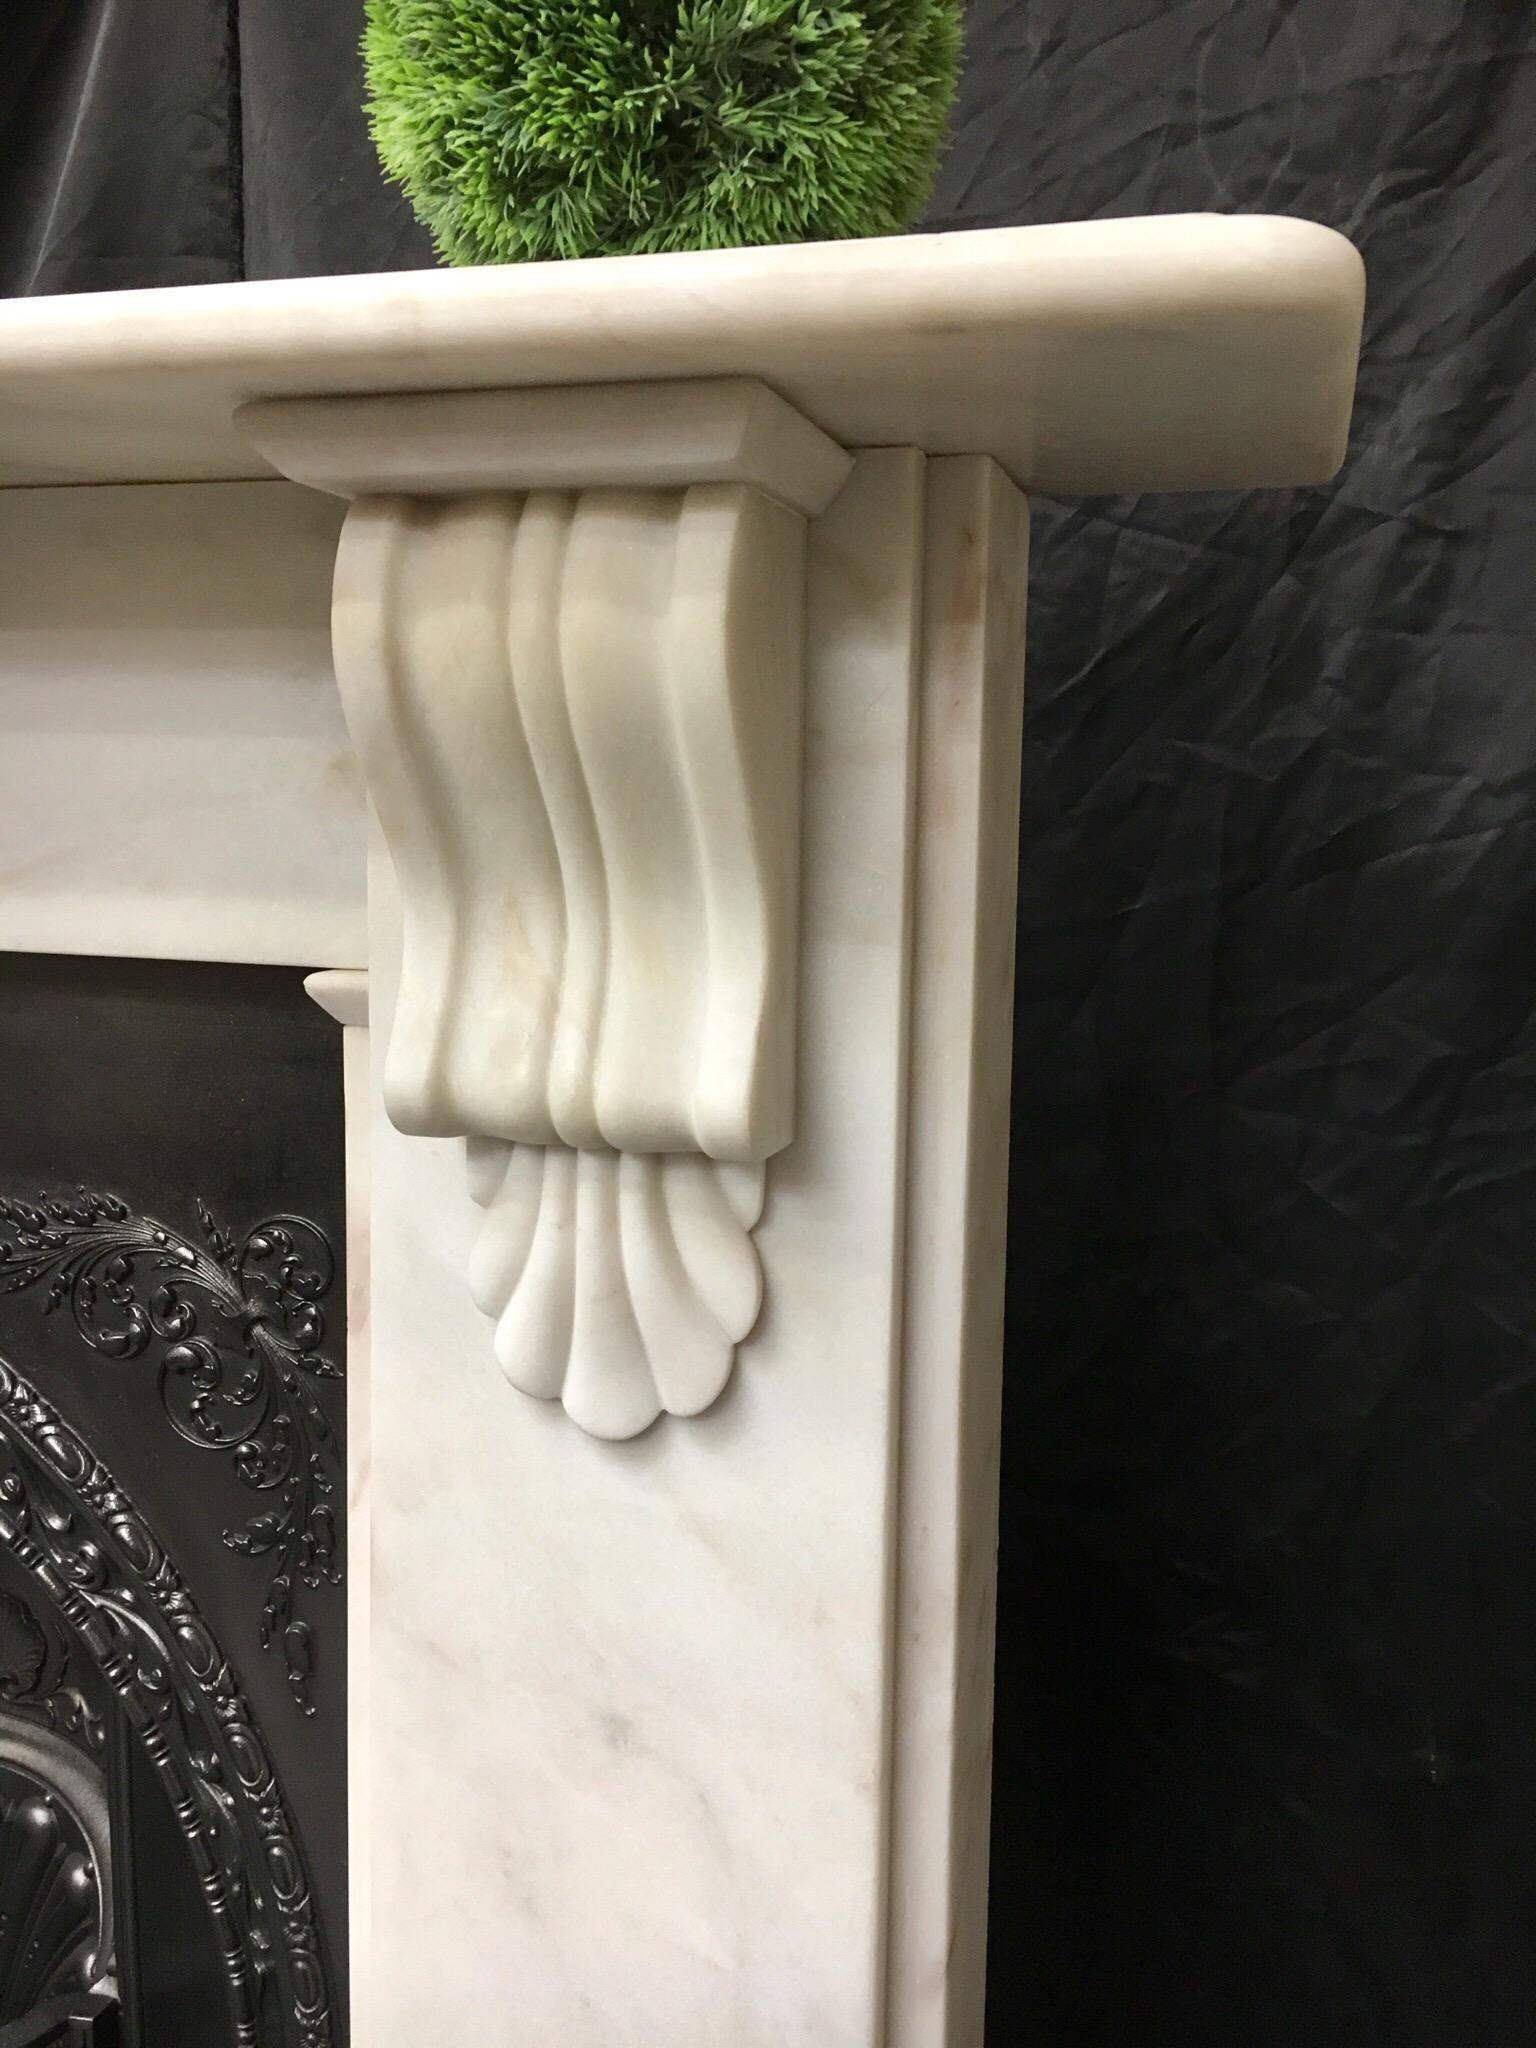 A period light marble corbel fireplace surround complete with its cast iron London arch insert. Fully restored and ready to install.
Fireplace opening size: 900mm wide x 950mm high.
Width is adjustable.